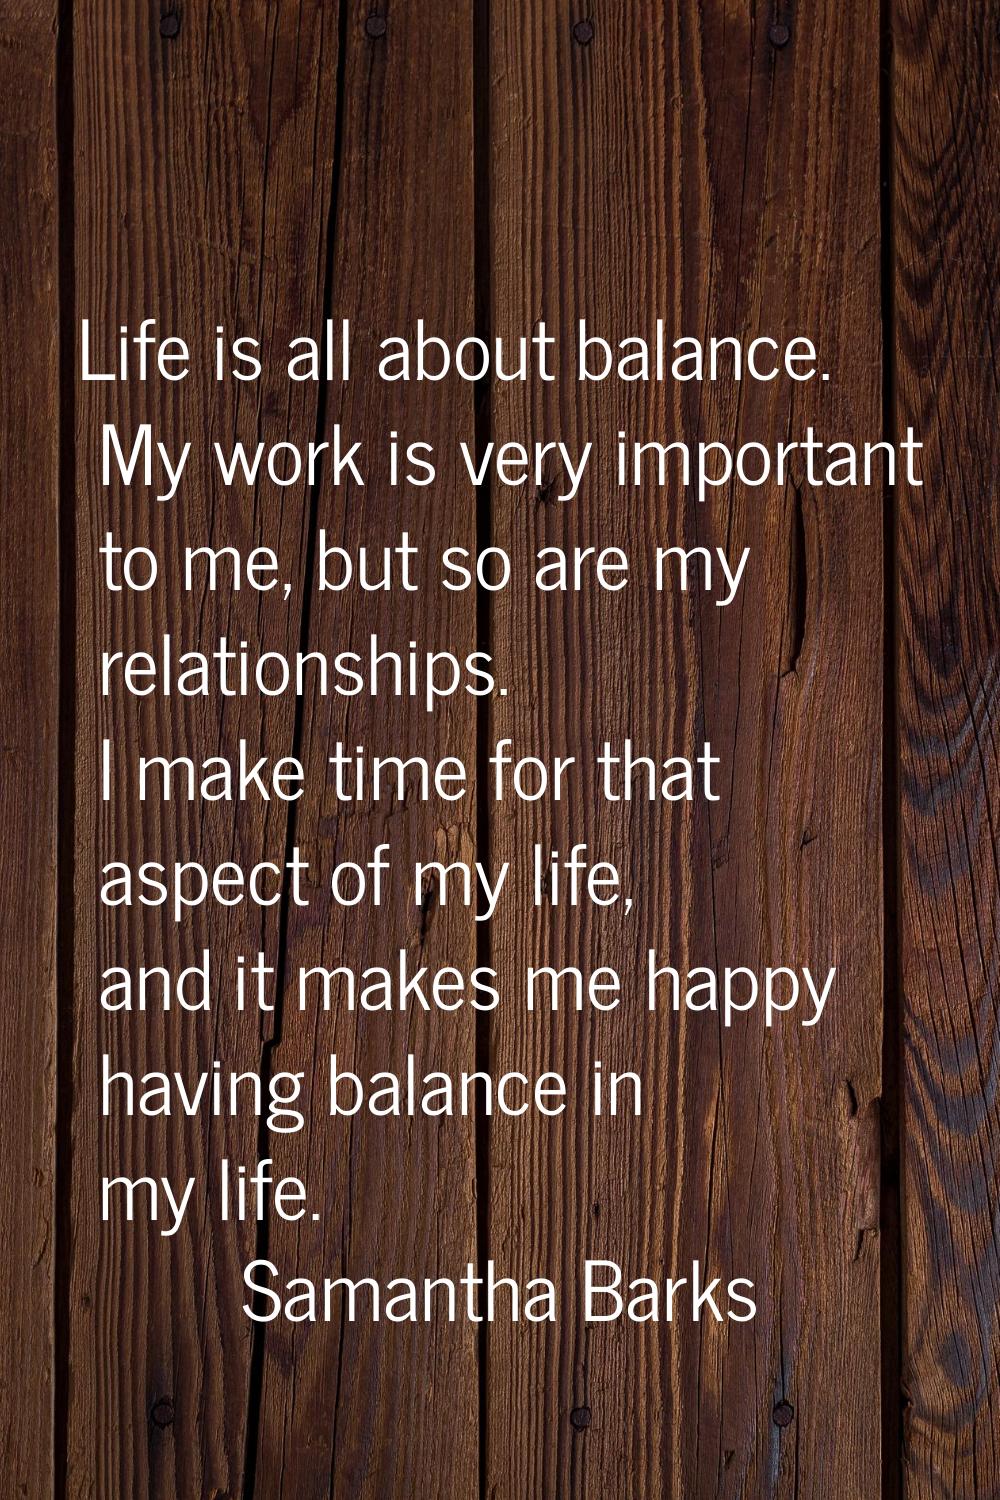 Life is all about balance. My work is very important to me, but so are my relationships. I make tim